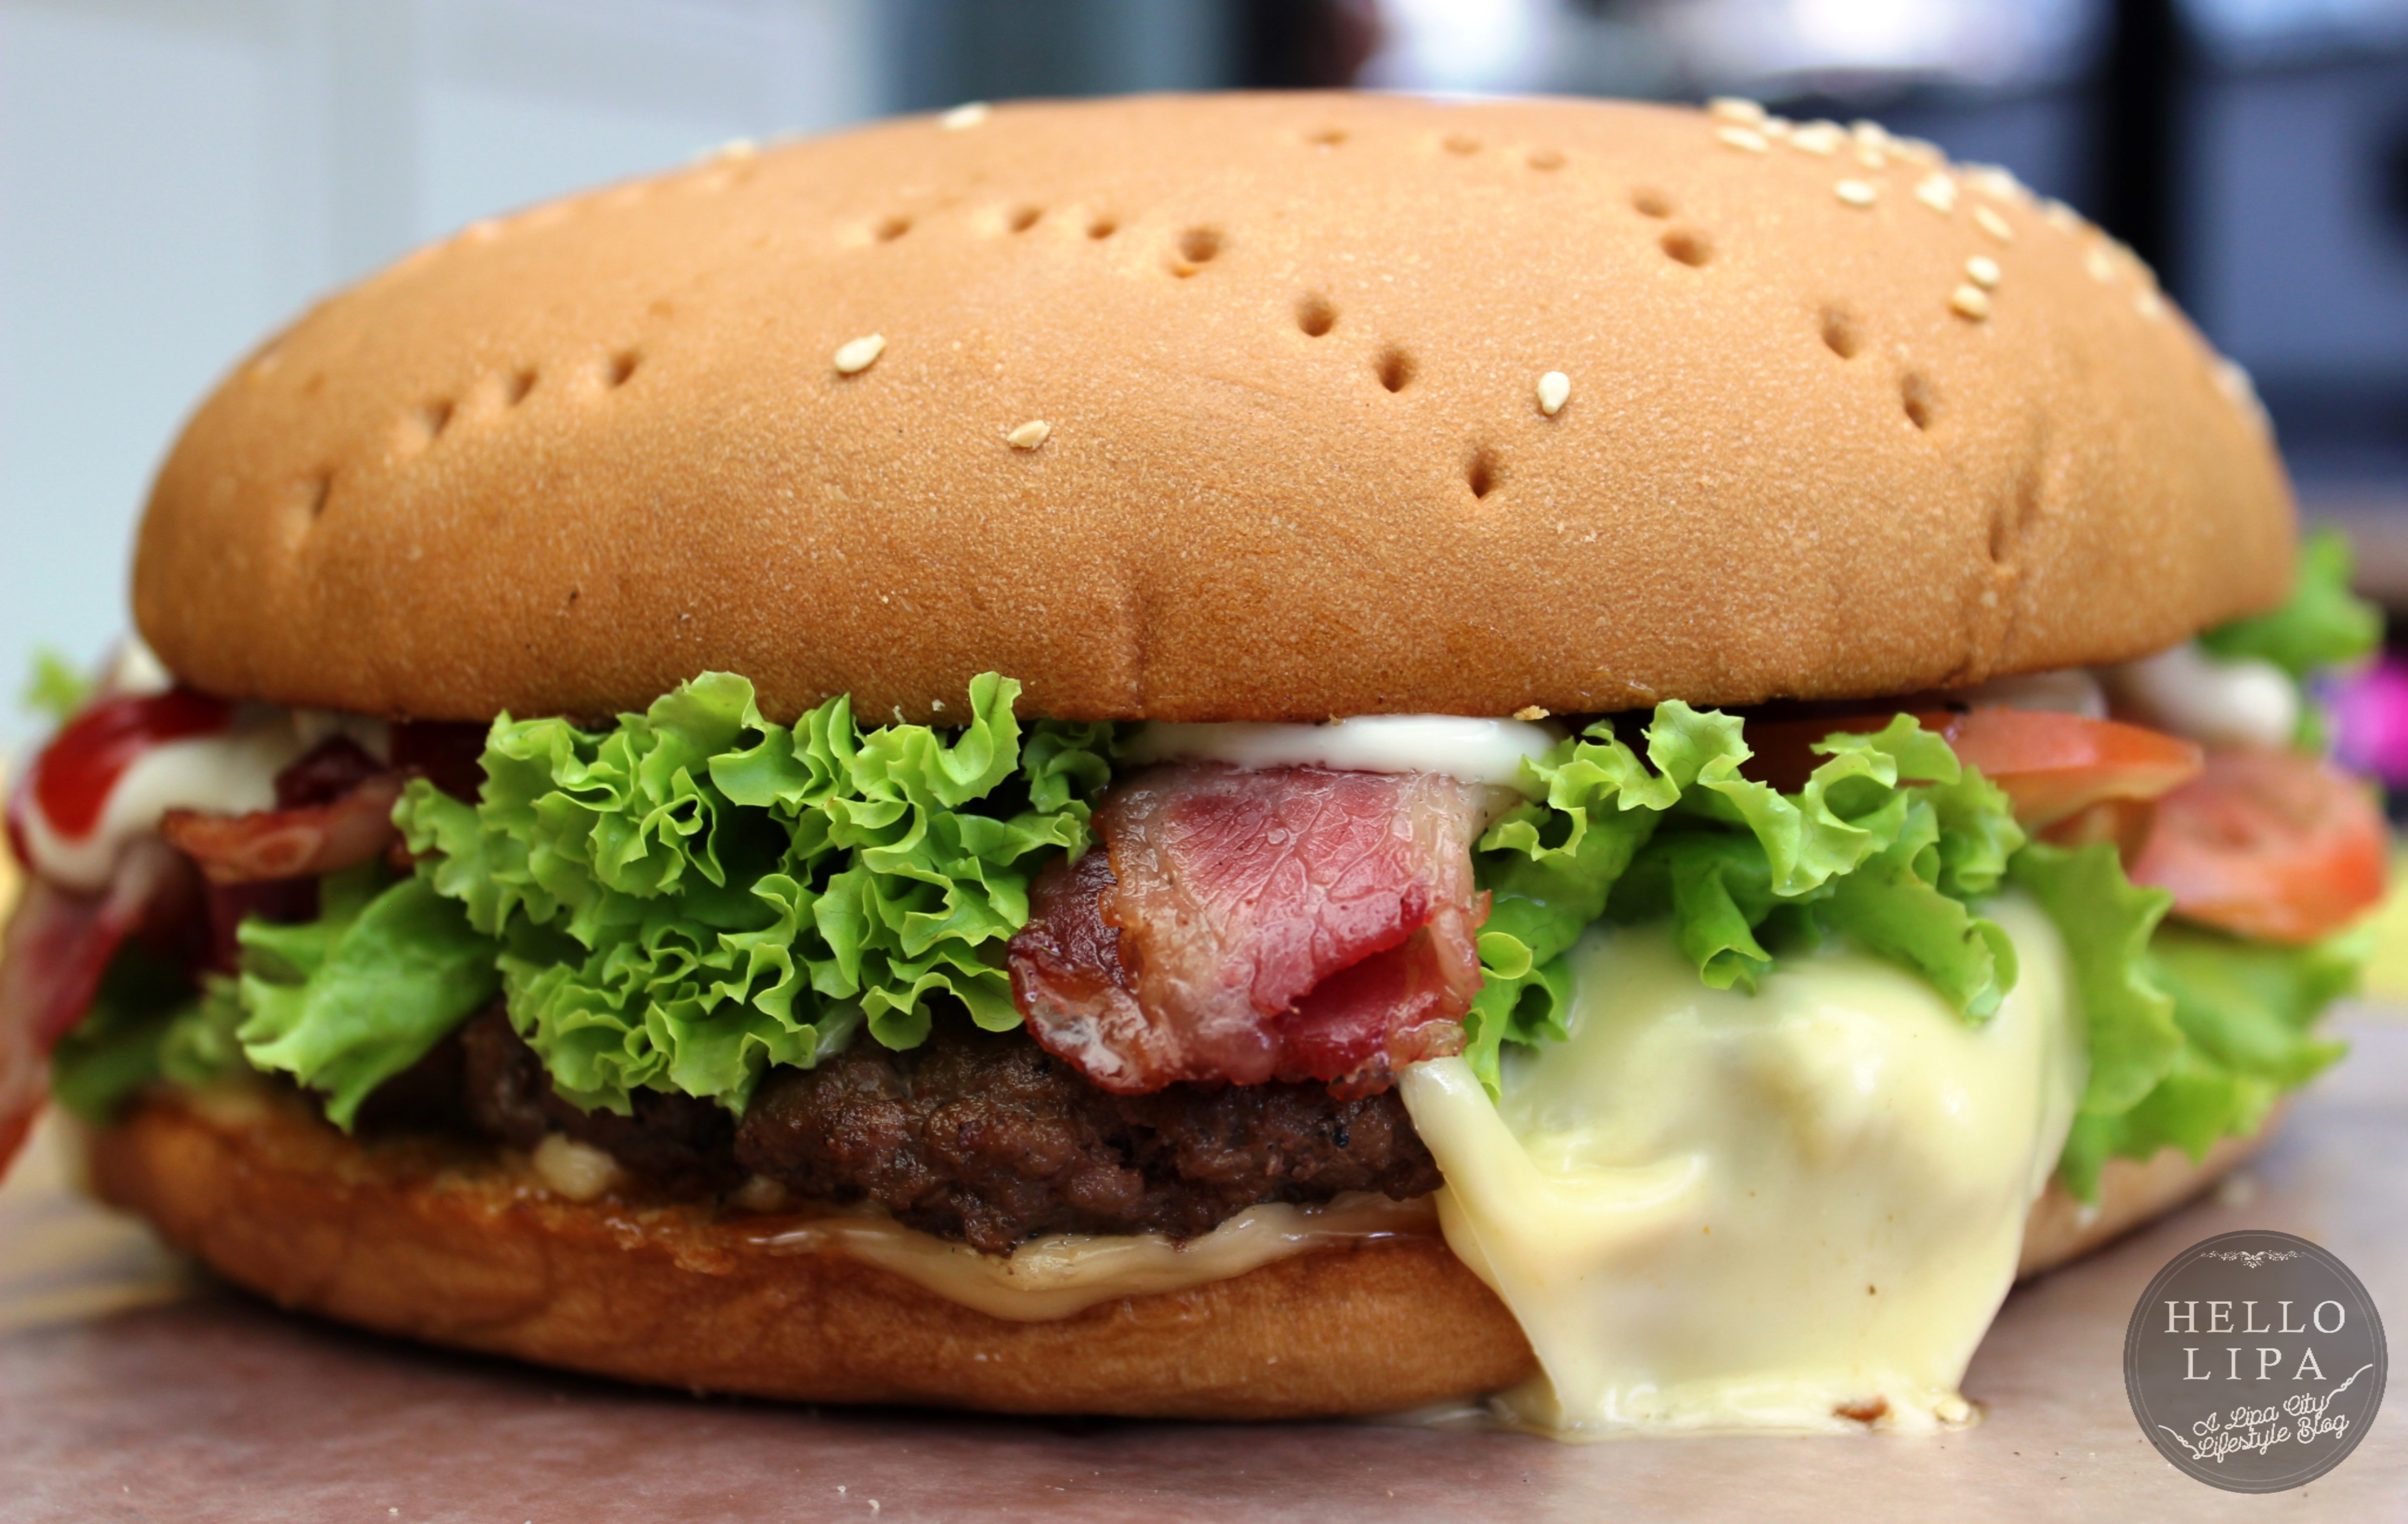 Collosso Lipa: The House of Giant Burgers is Back!